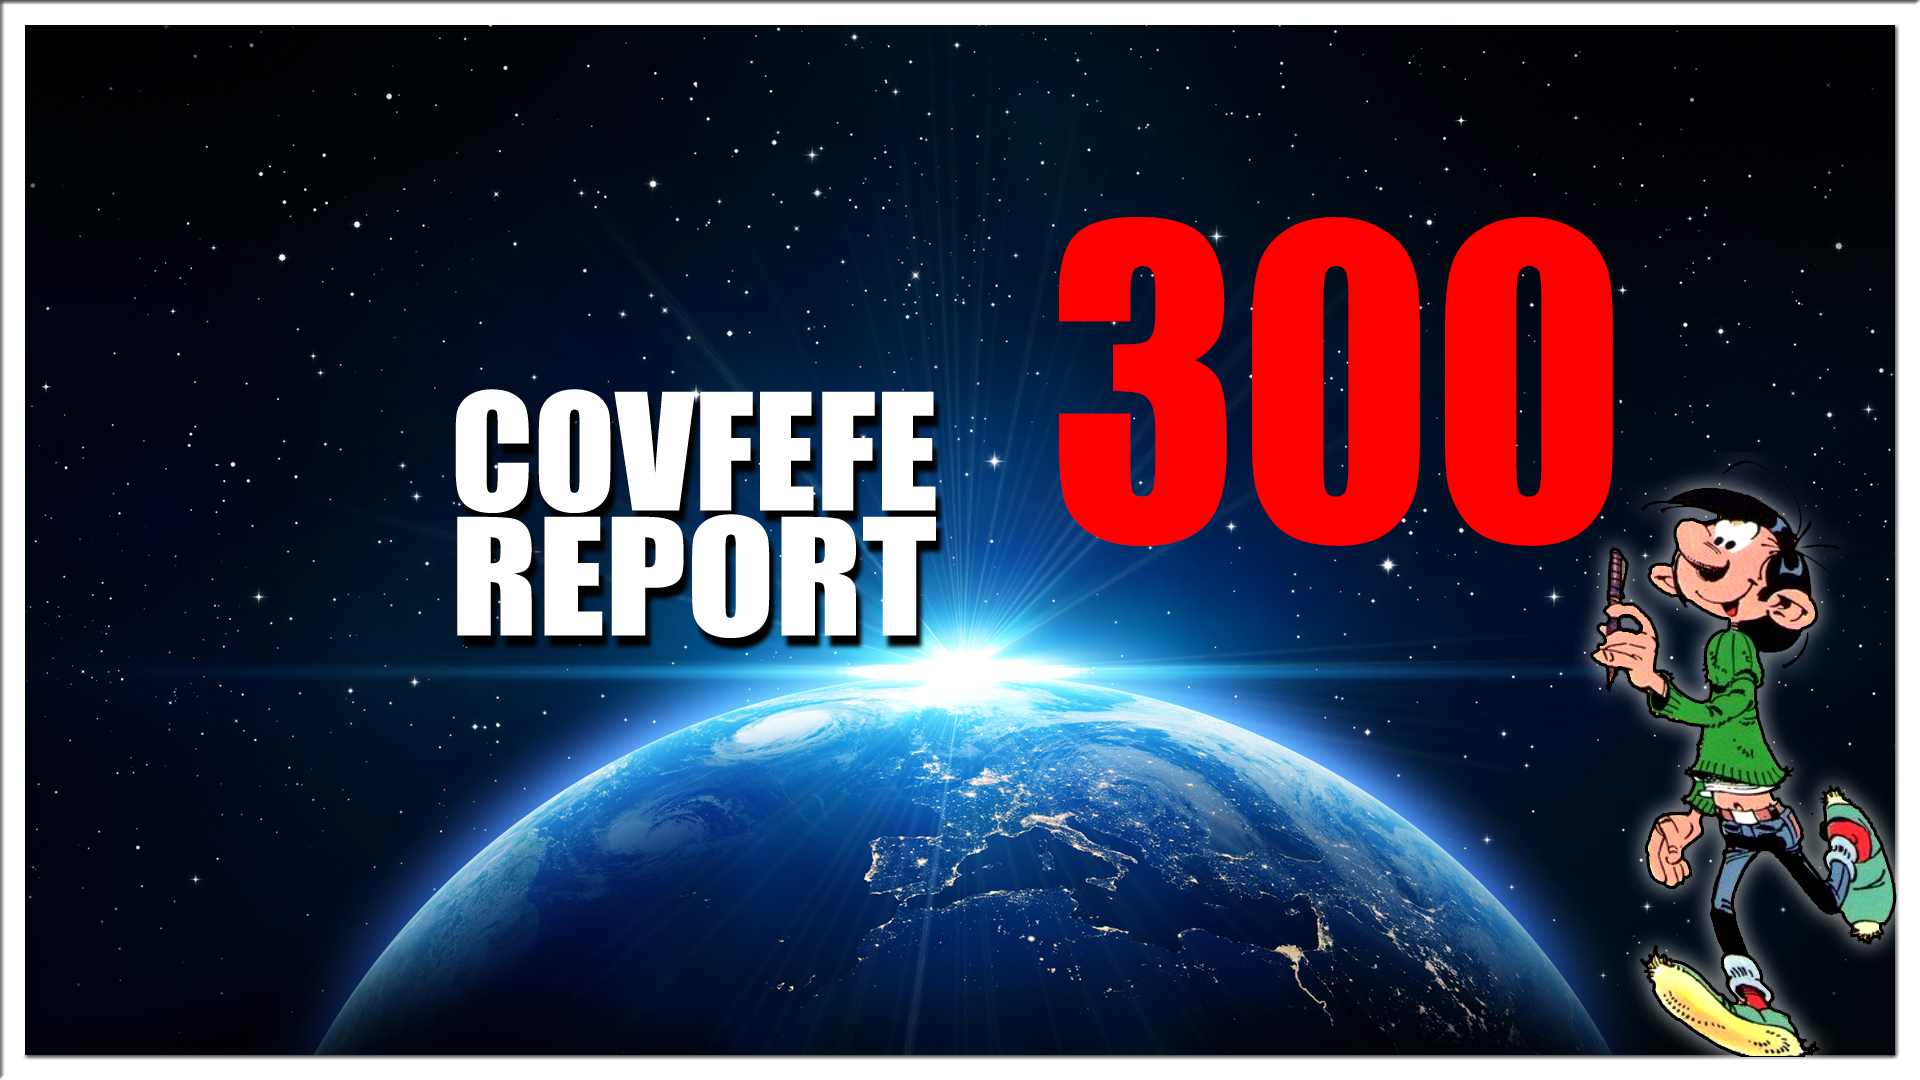 Covfefe report 300. , Clinton Foundation at the Center, All in the family, DLA Piper, Gee